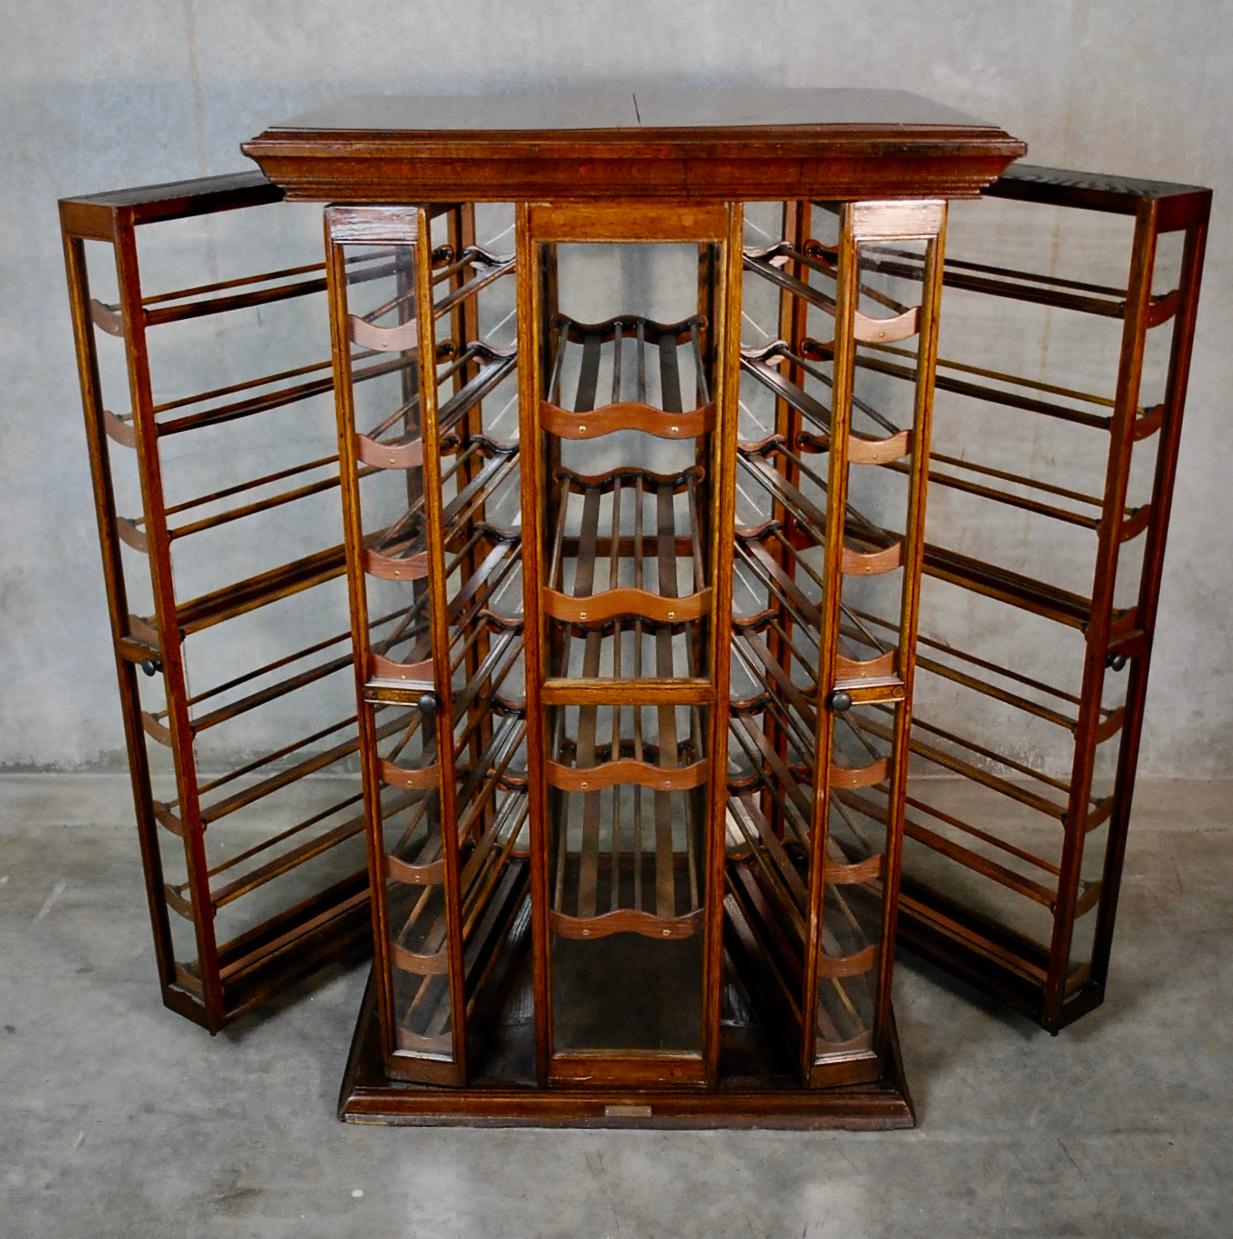 An Exhibition Showcase Company ribbon, spool cabinet, Erie, Pennsylvania & Guelph Ontario. Built cherry frame with swinging glass doors and panels. 
Henrich's Patent November 1895. 
Ideal for holding wine bottles.